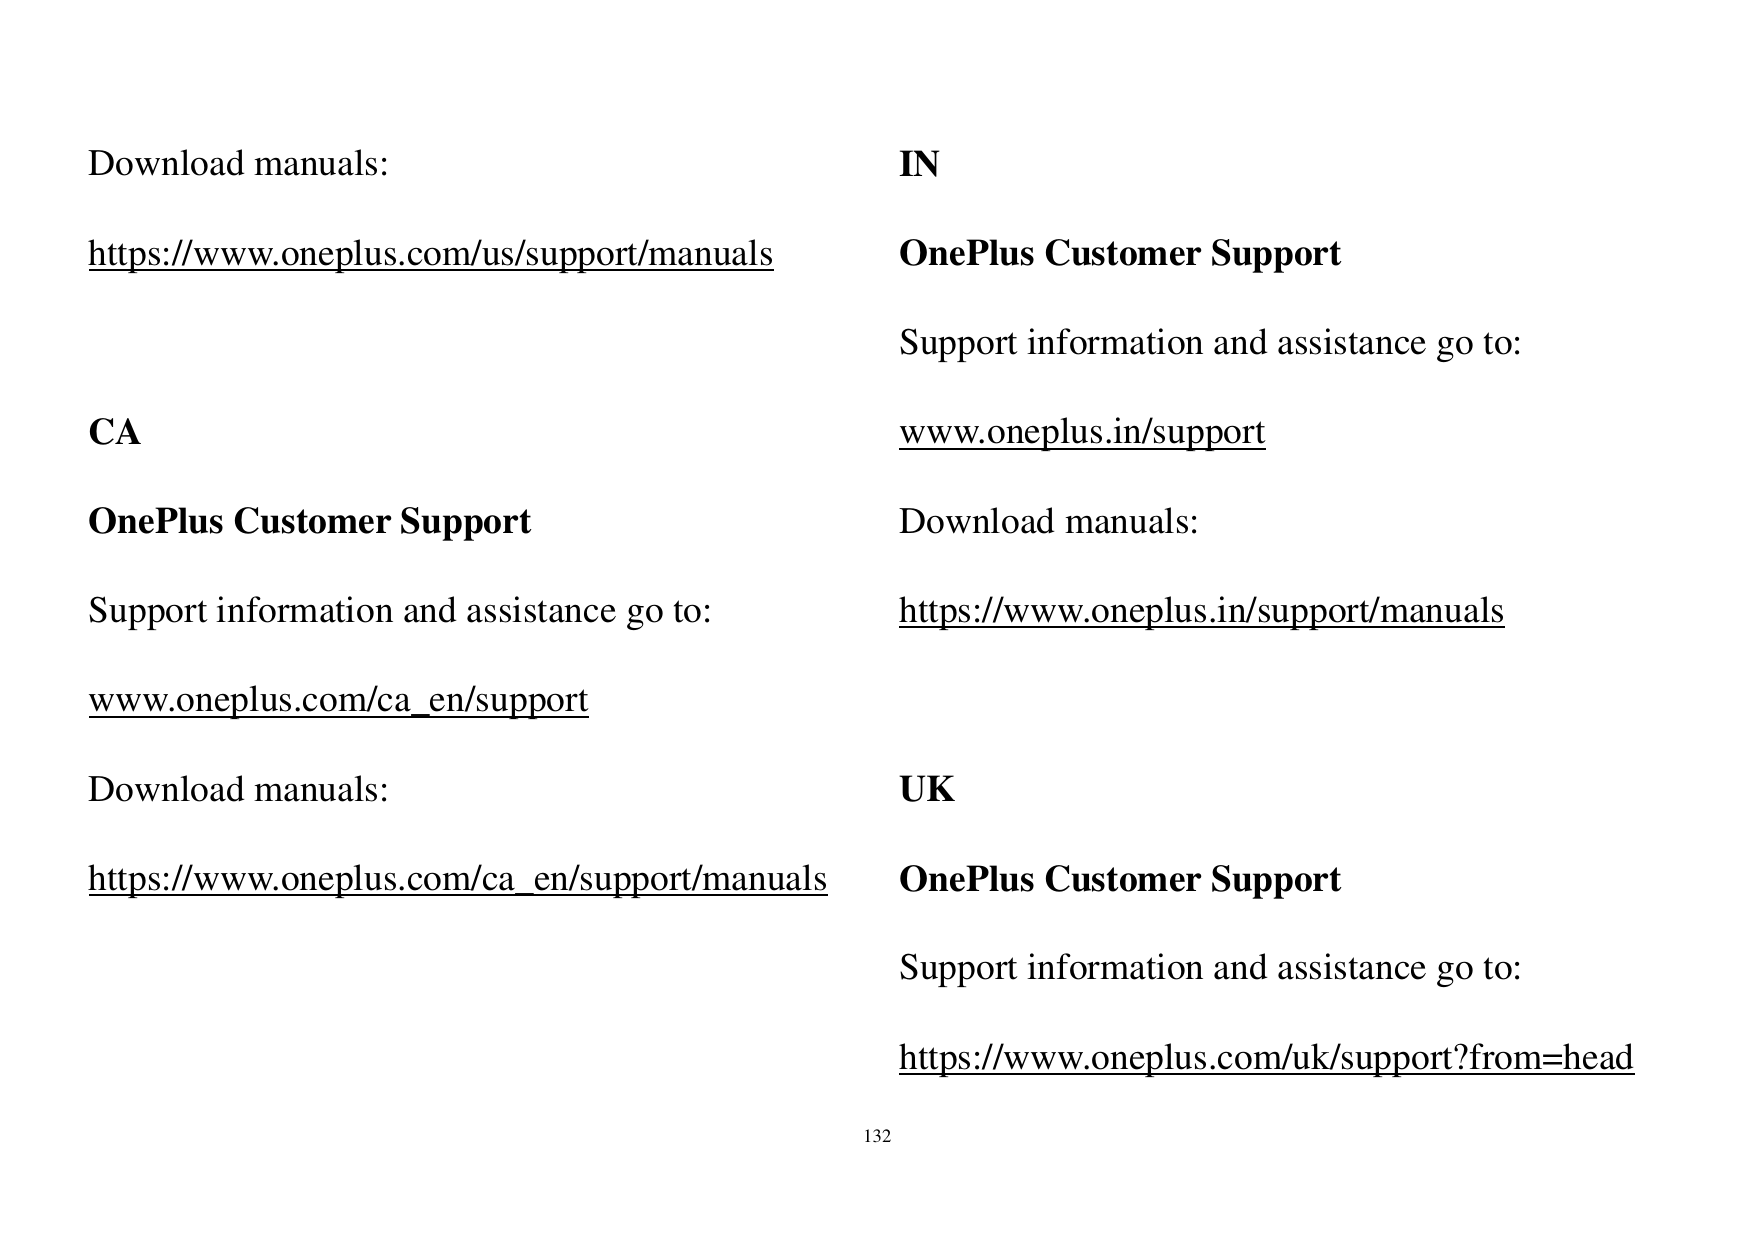 Download manuals:INhttps://www.oneplus.com/us/support/manualsOnePlus Customer SupportSupport information and assistance go to:CA